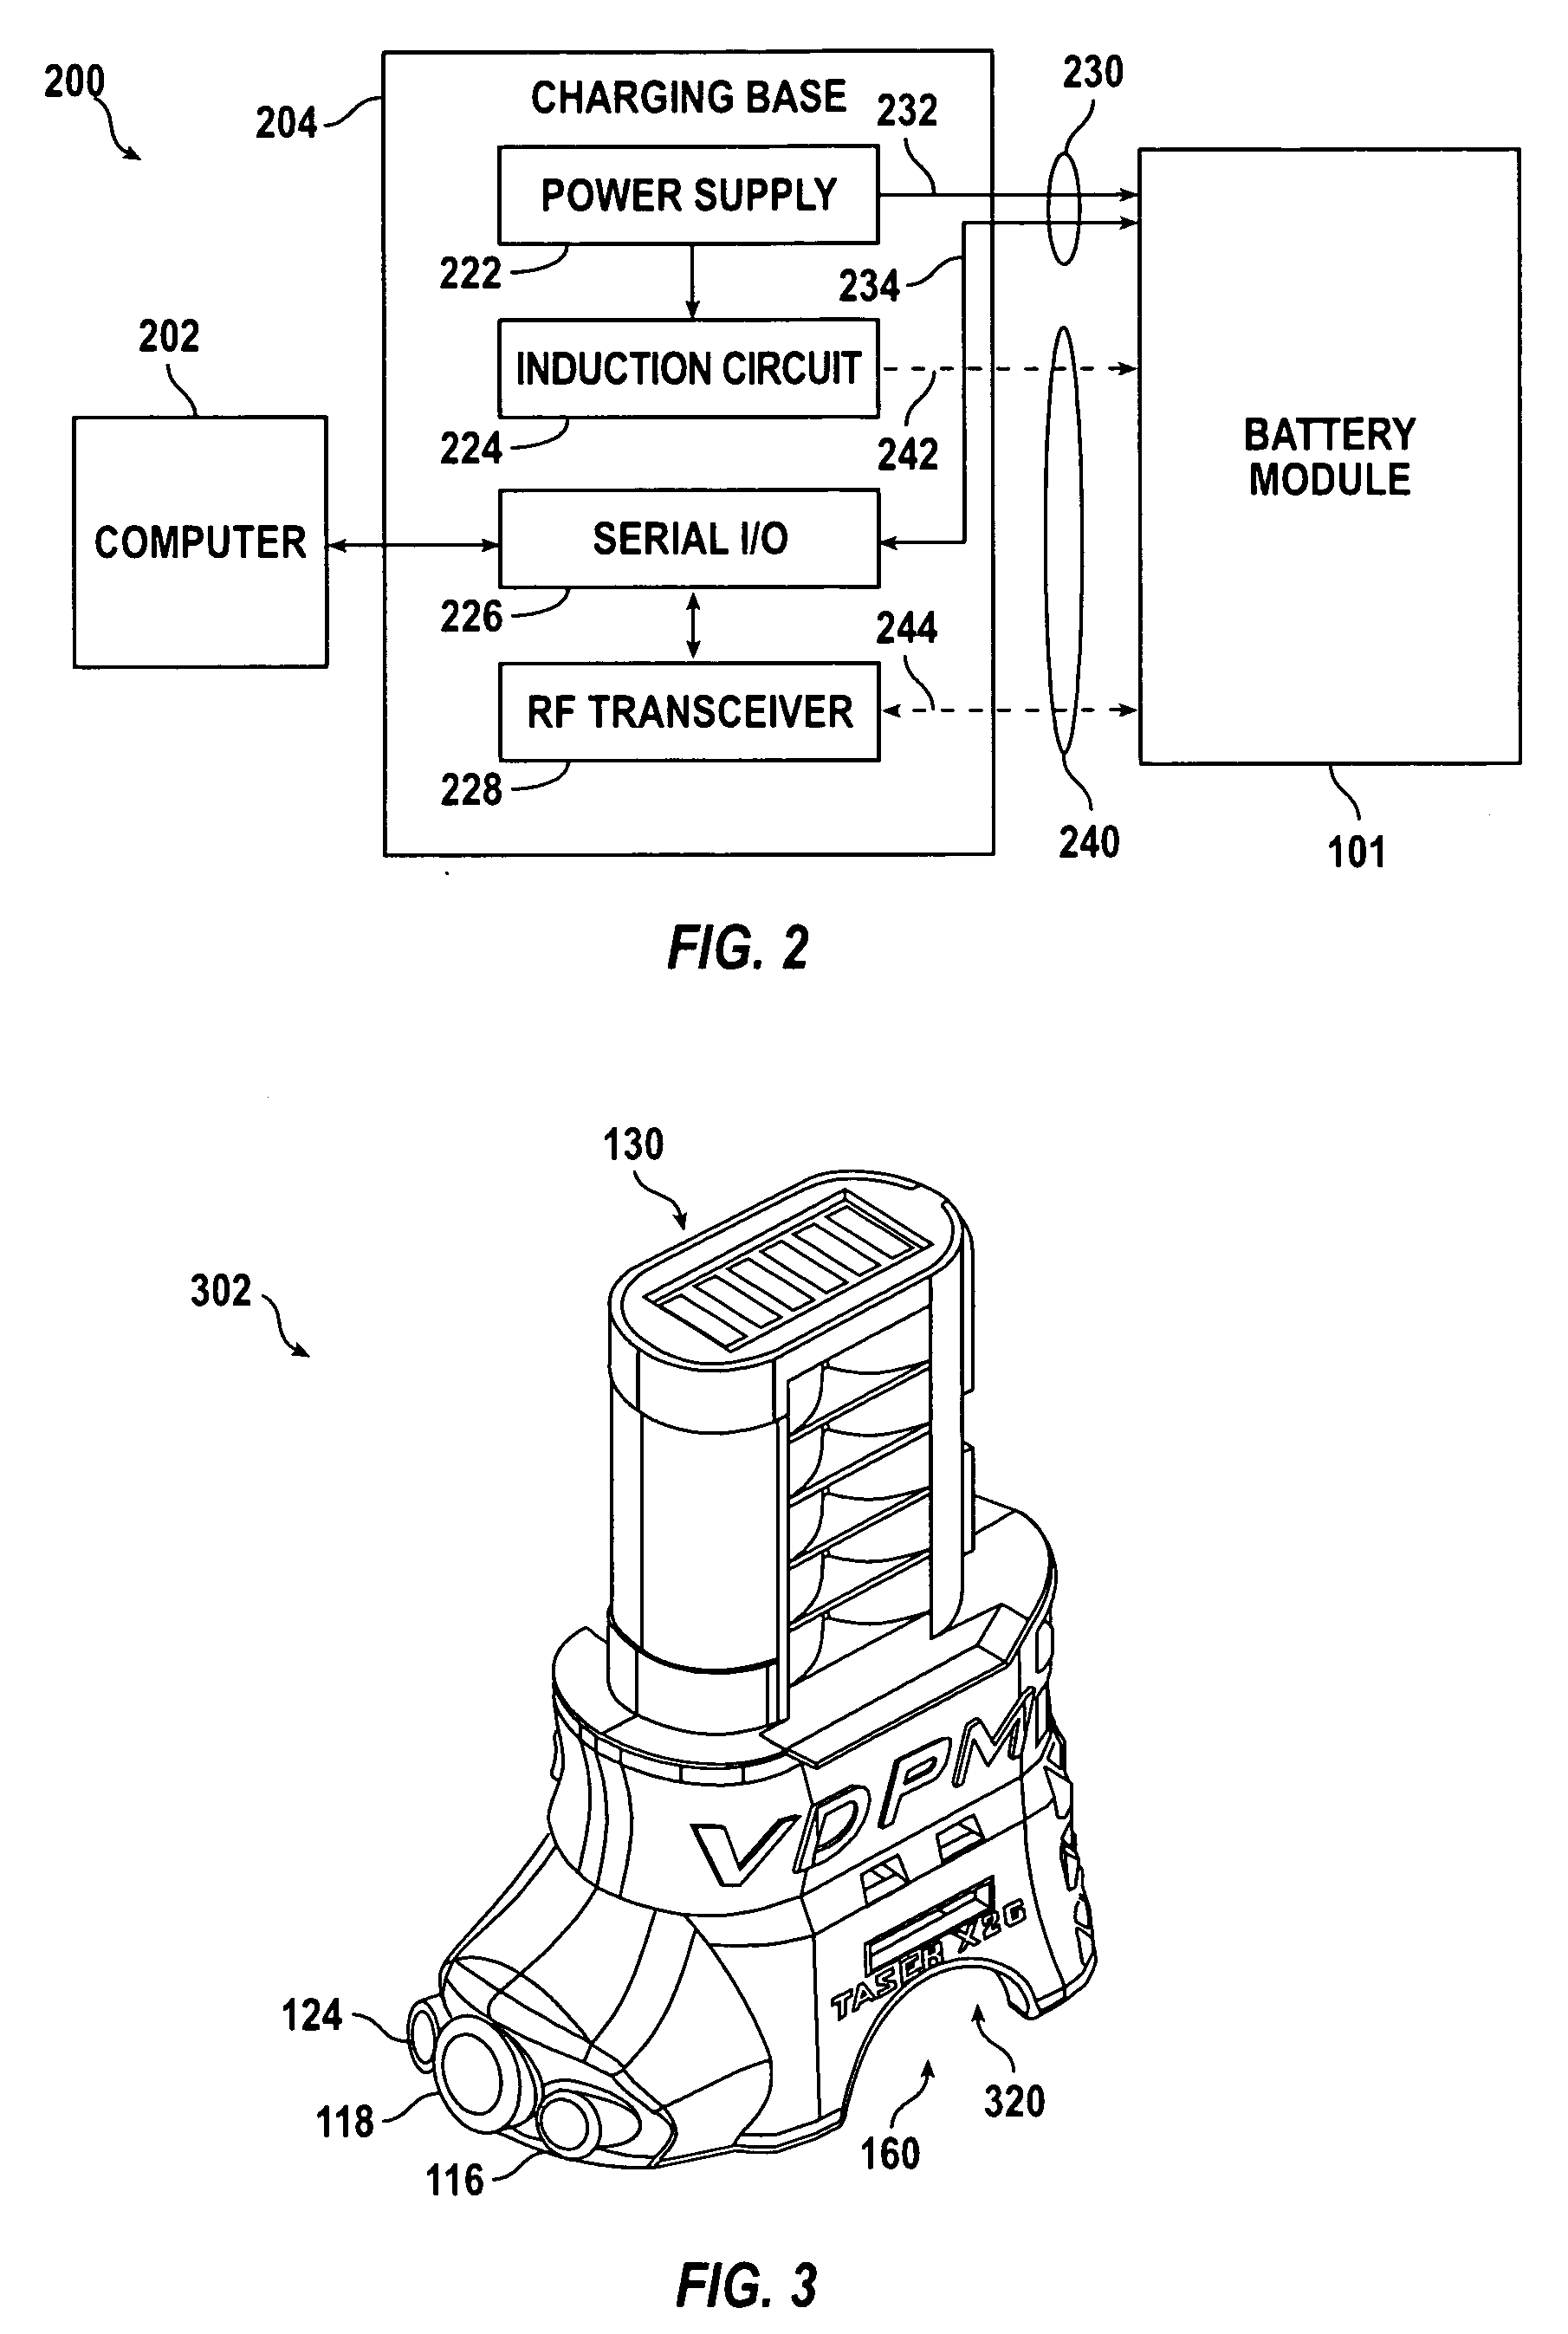 Systems and methods for electronic weaponry having audio and/or video recording capability